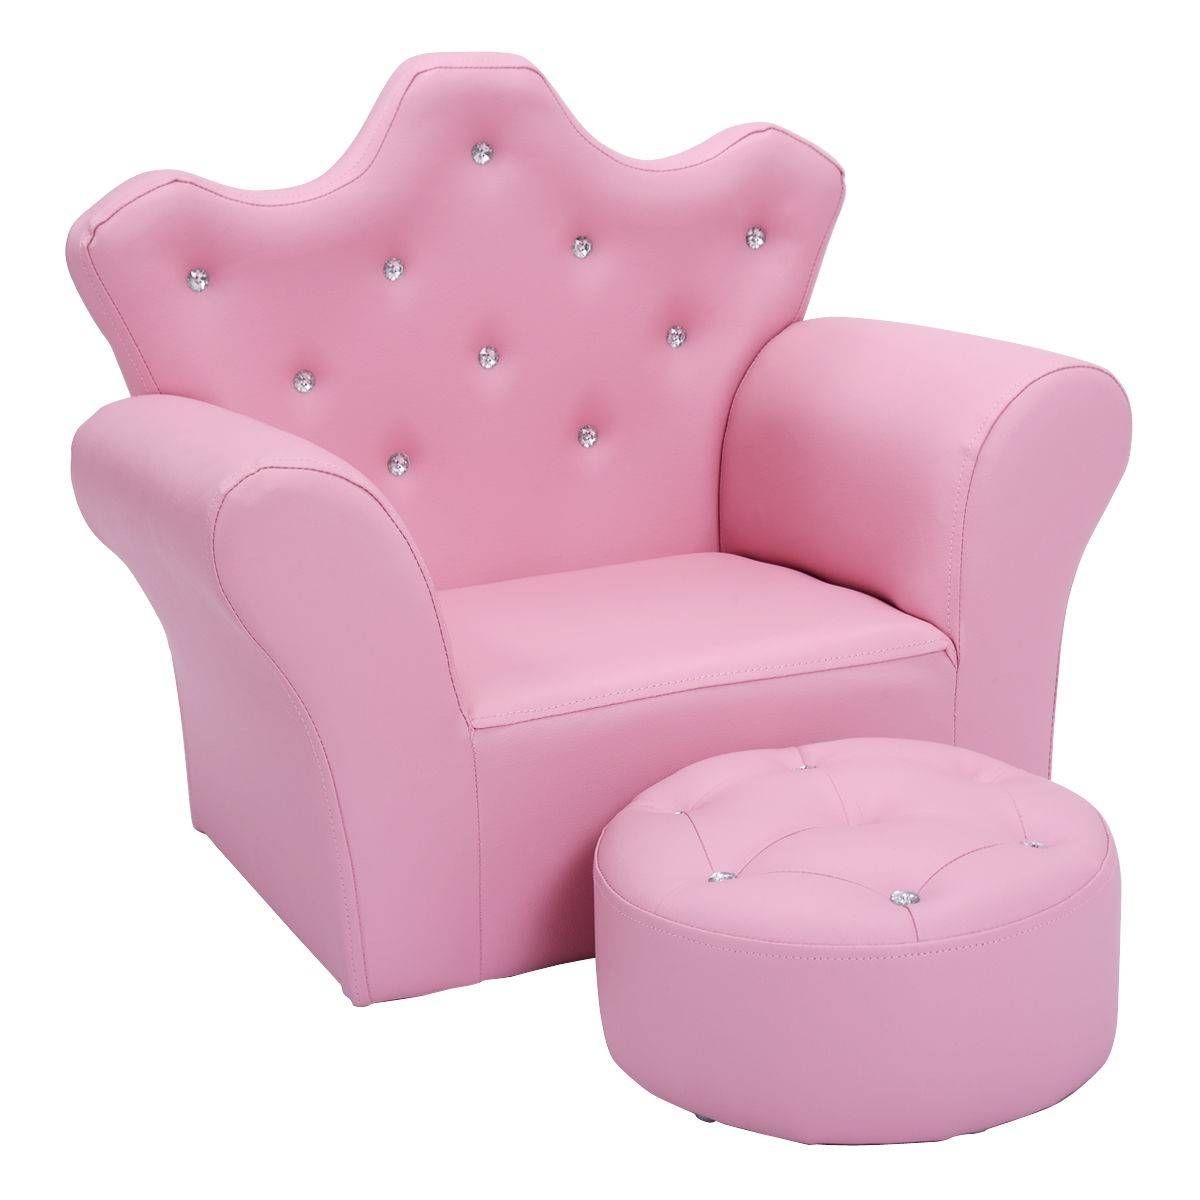 Pink Kids Sofa Armrest Couch With Ottoman – Sofas – Furniture Intended For Sofa Chair With Ottoman (View 10 of 30)